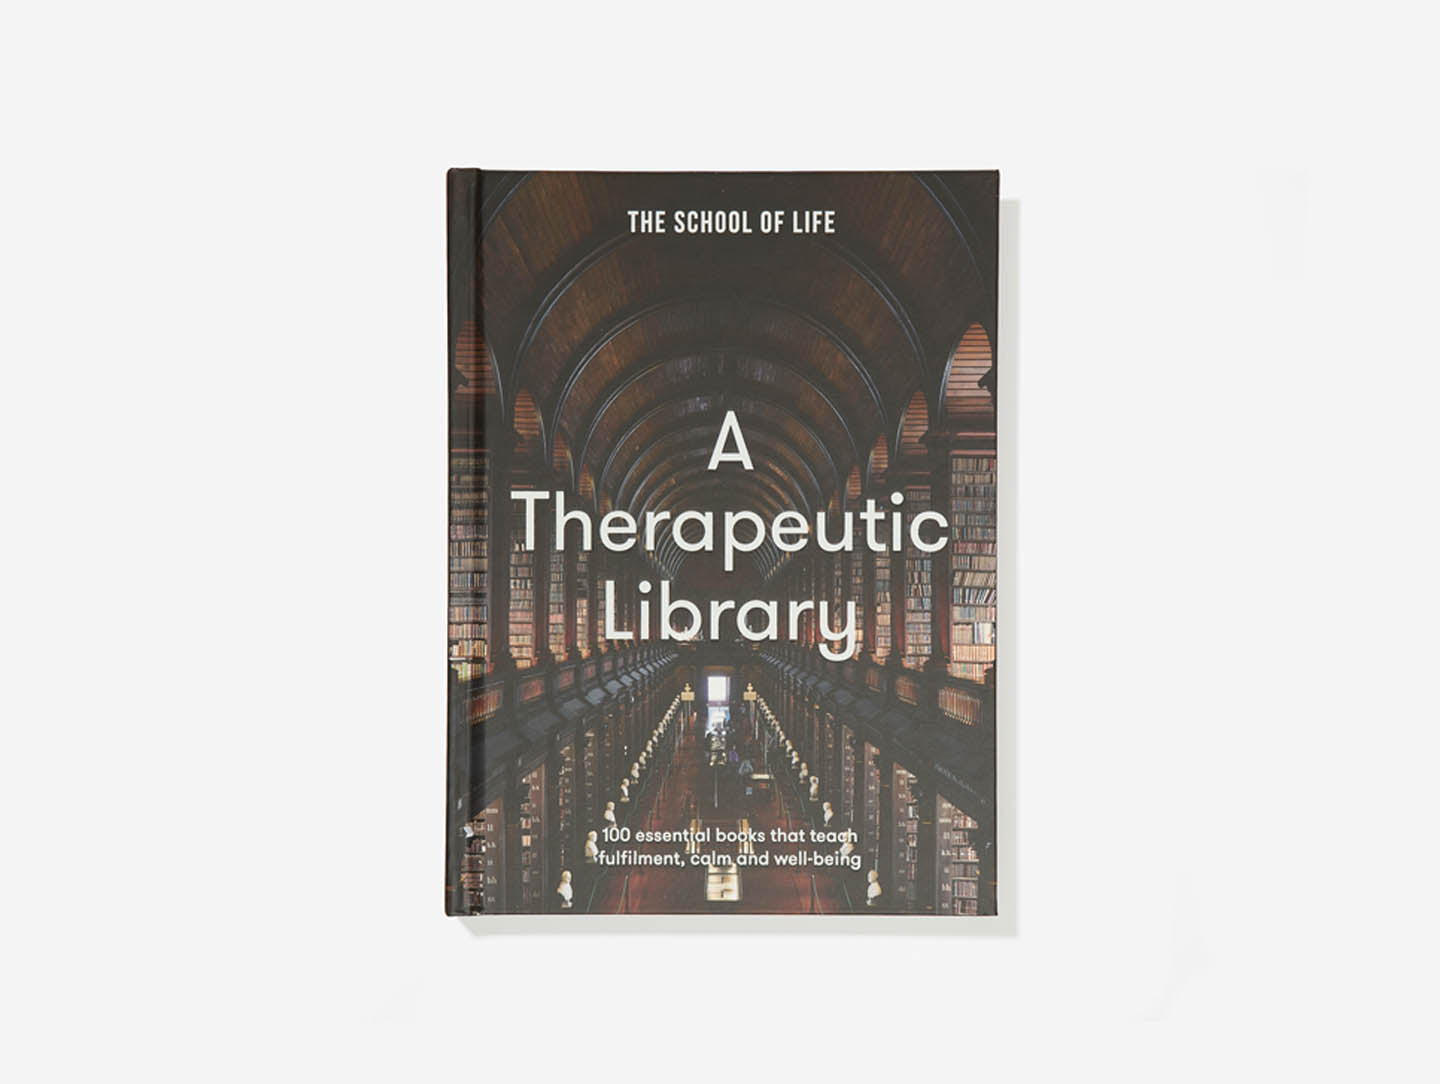 The School of Life - A Therapeutic Library